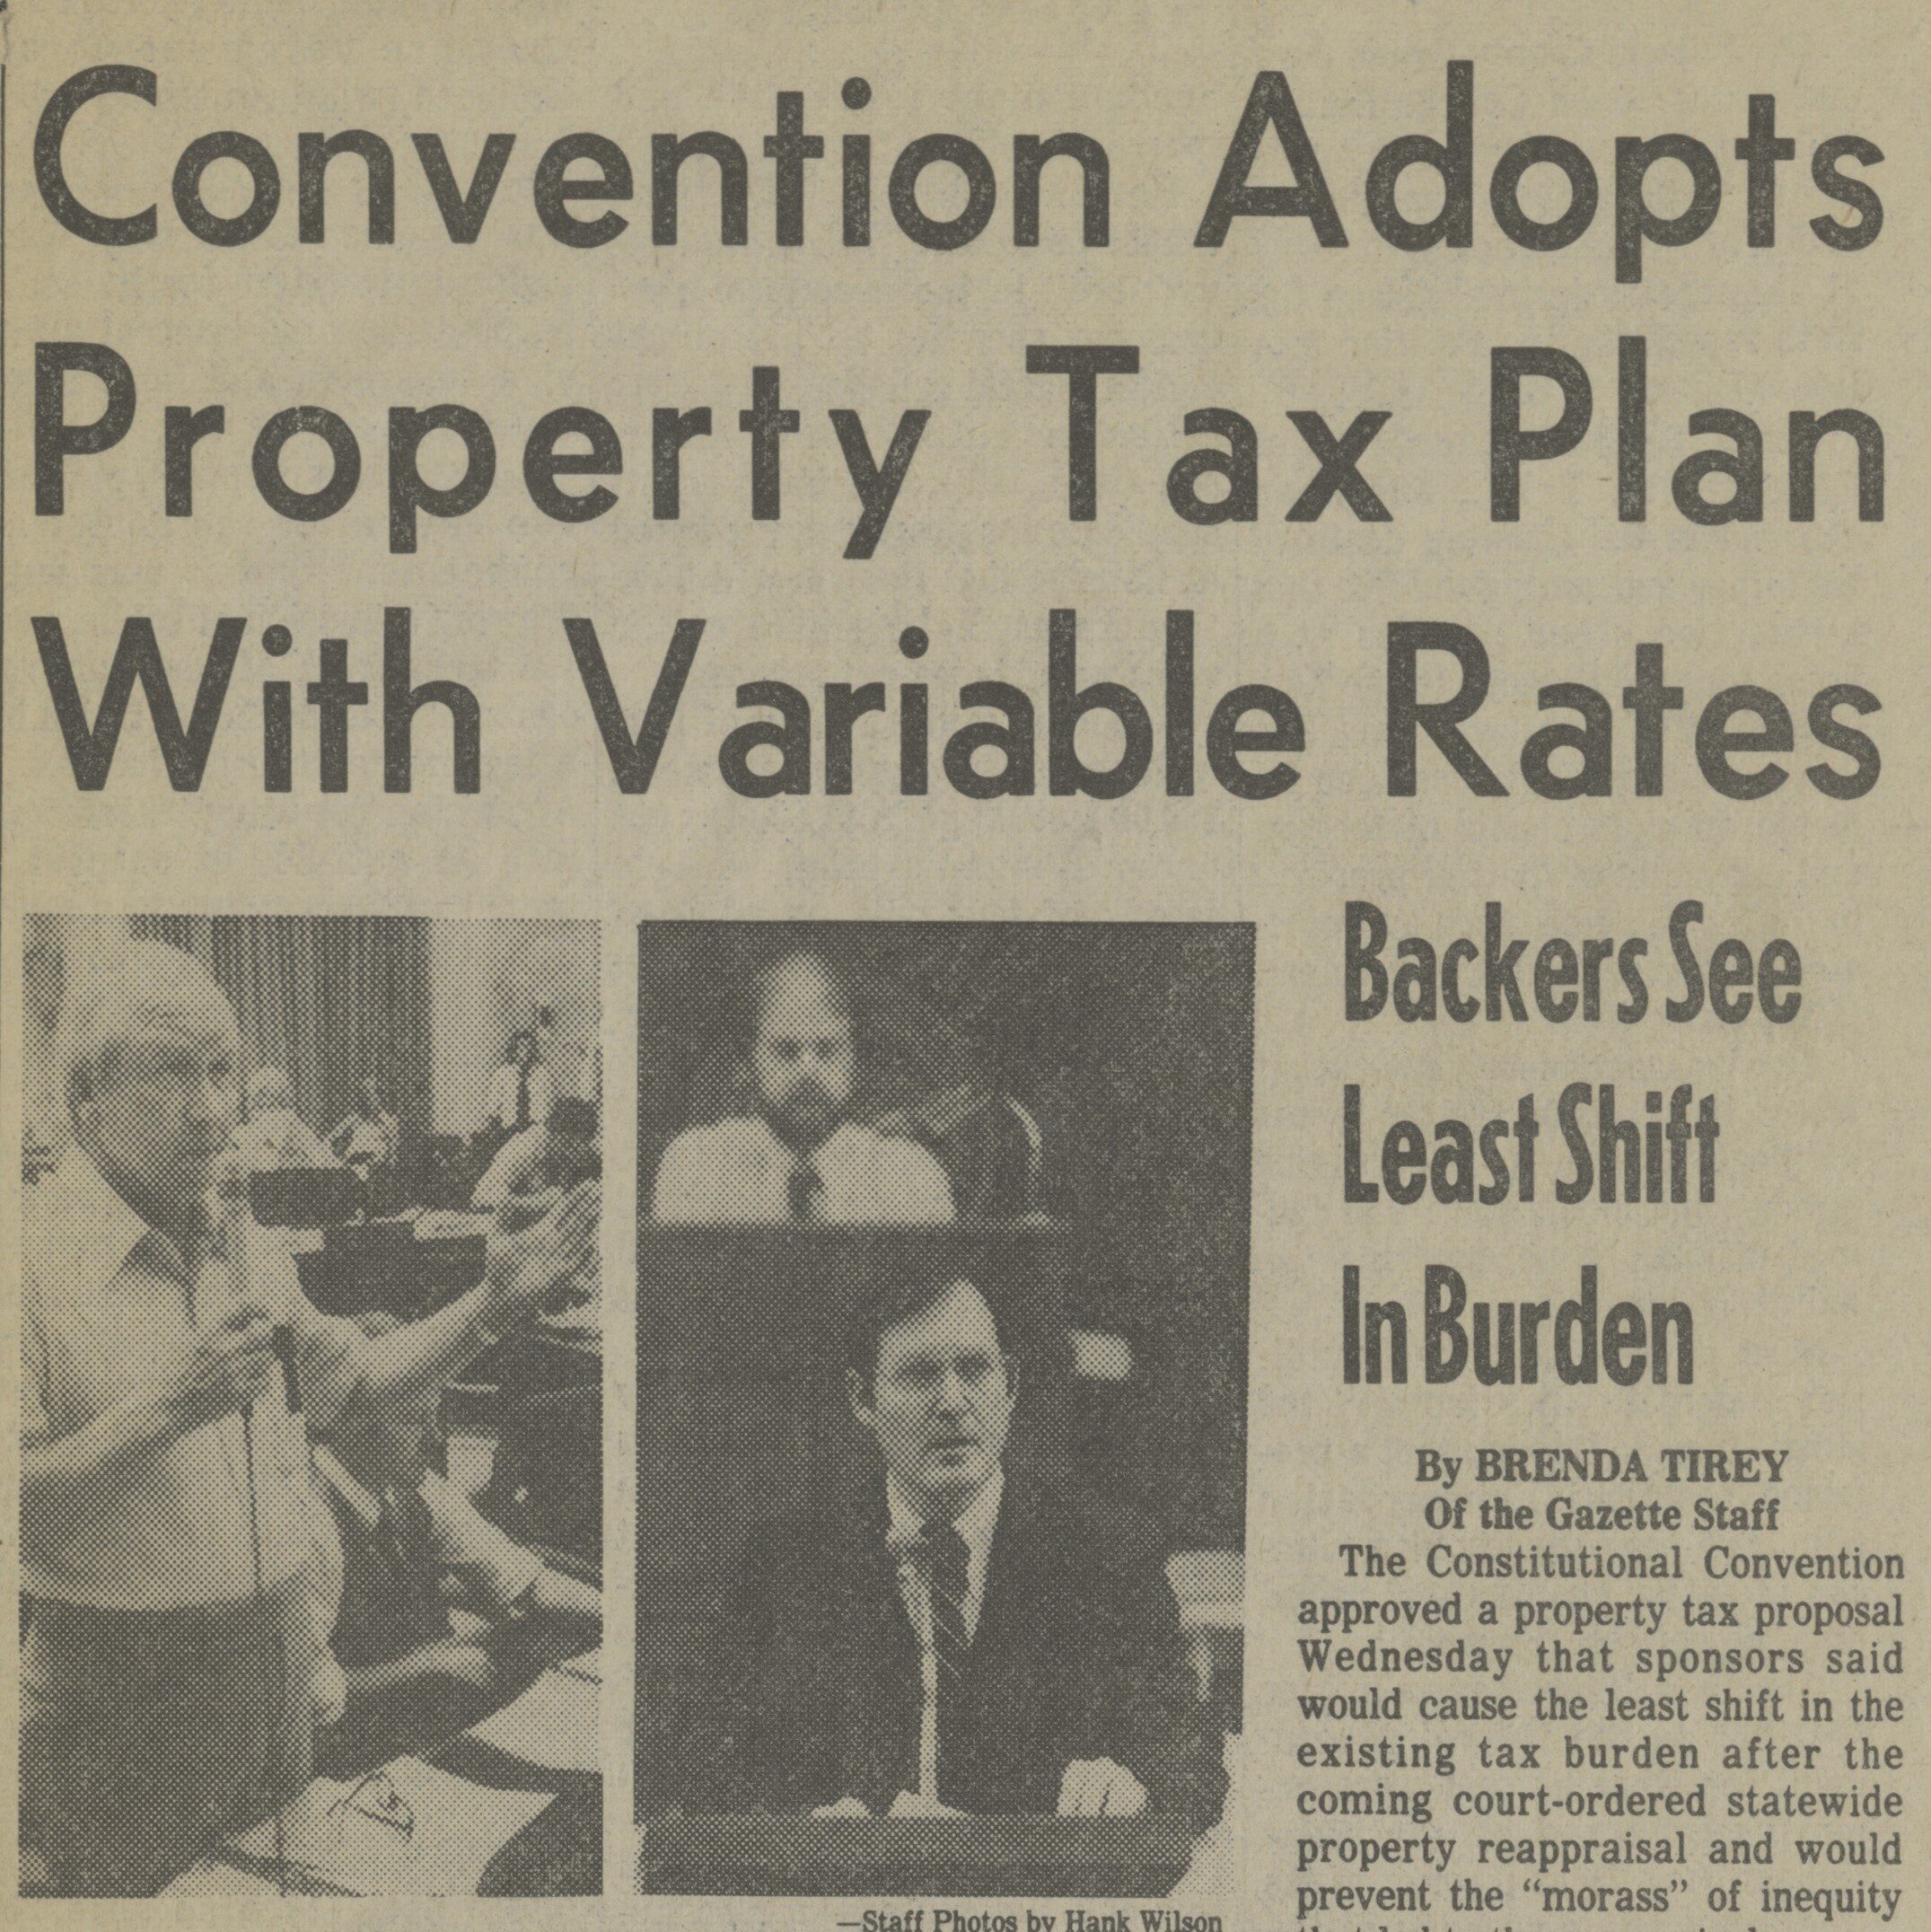 Newspaper clipping titled, "Convention Adopts Property Tax Plan With Variable Rates: Backers See least Shift in Burden"